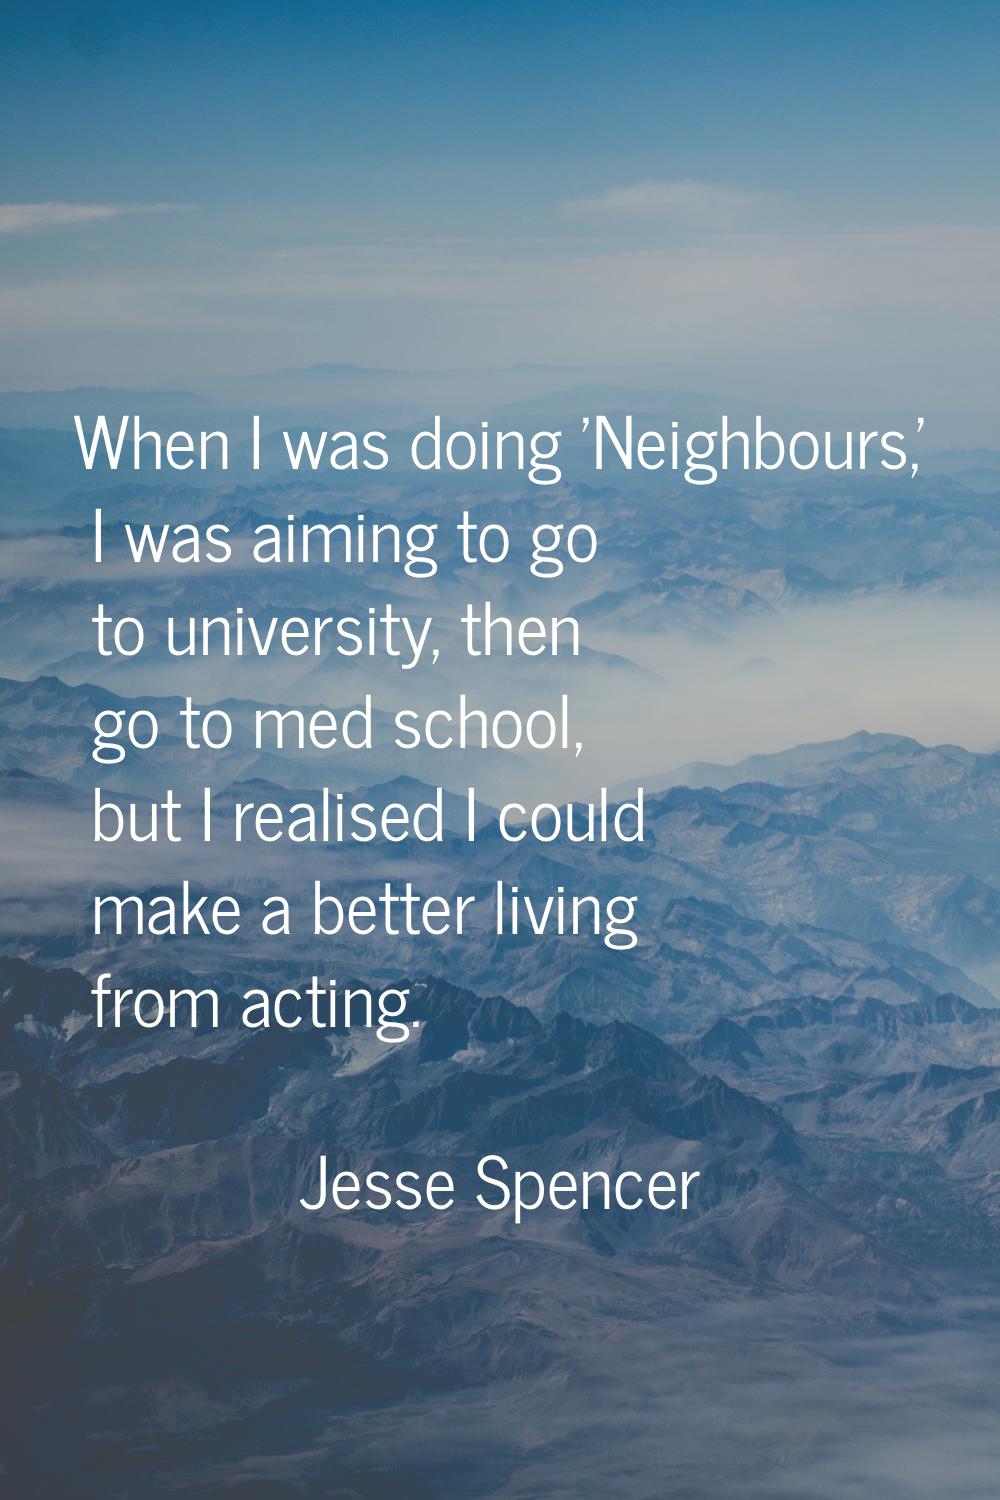 When I was doing 'Neighbours,' I was aiming to go to university, then go to med school, but I reali